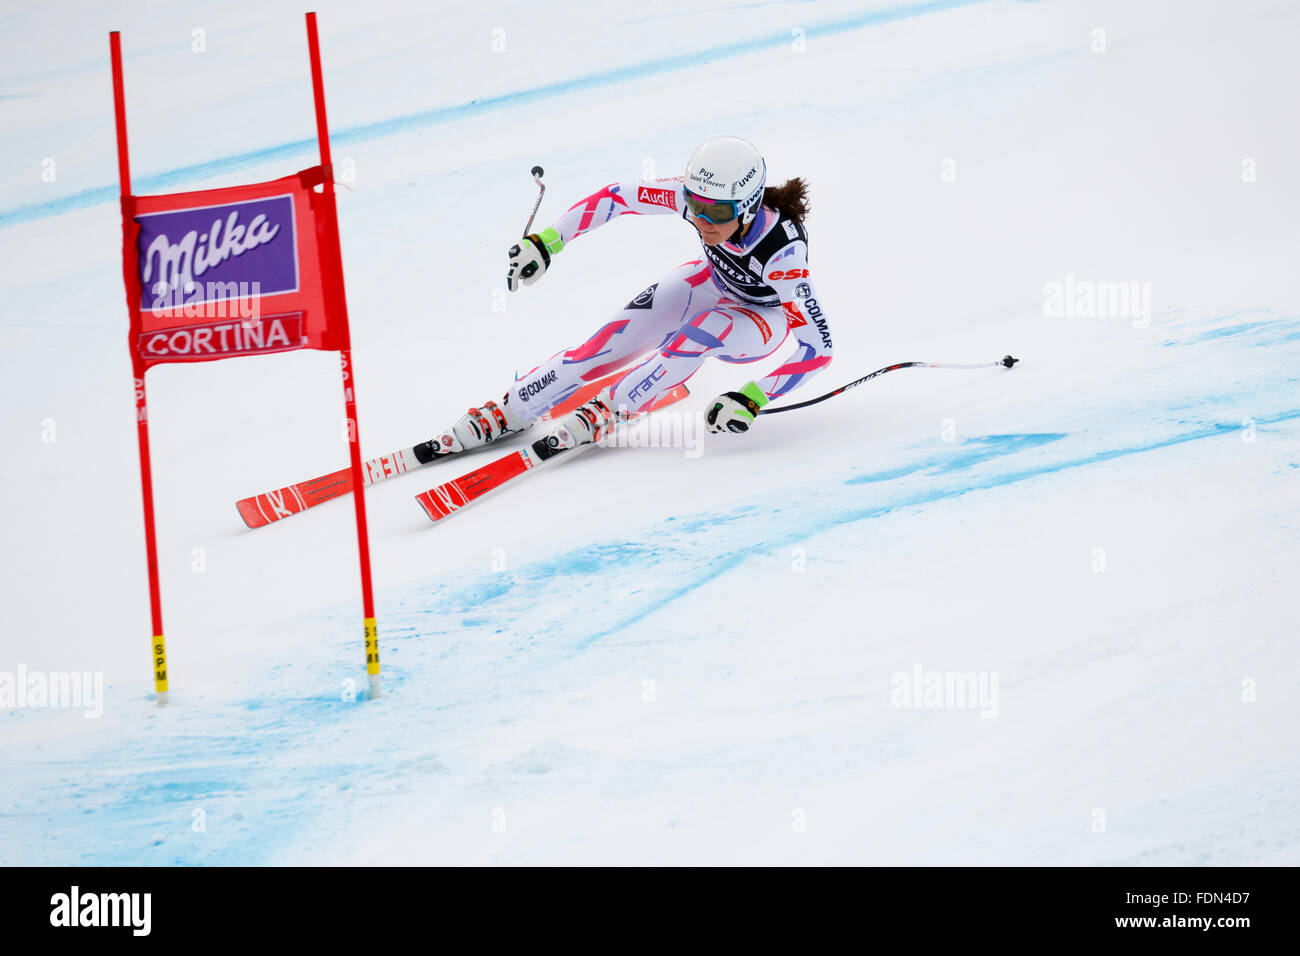 Cortina d’Ampezzo, Italy 24 January 2016. BESSY Anouk (Fra) competing in the Audi Fis Alpine Skiing World Cup Women’s Super G Stock Photo